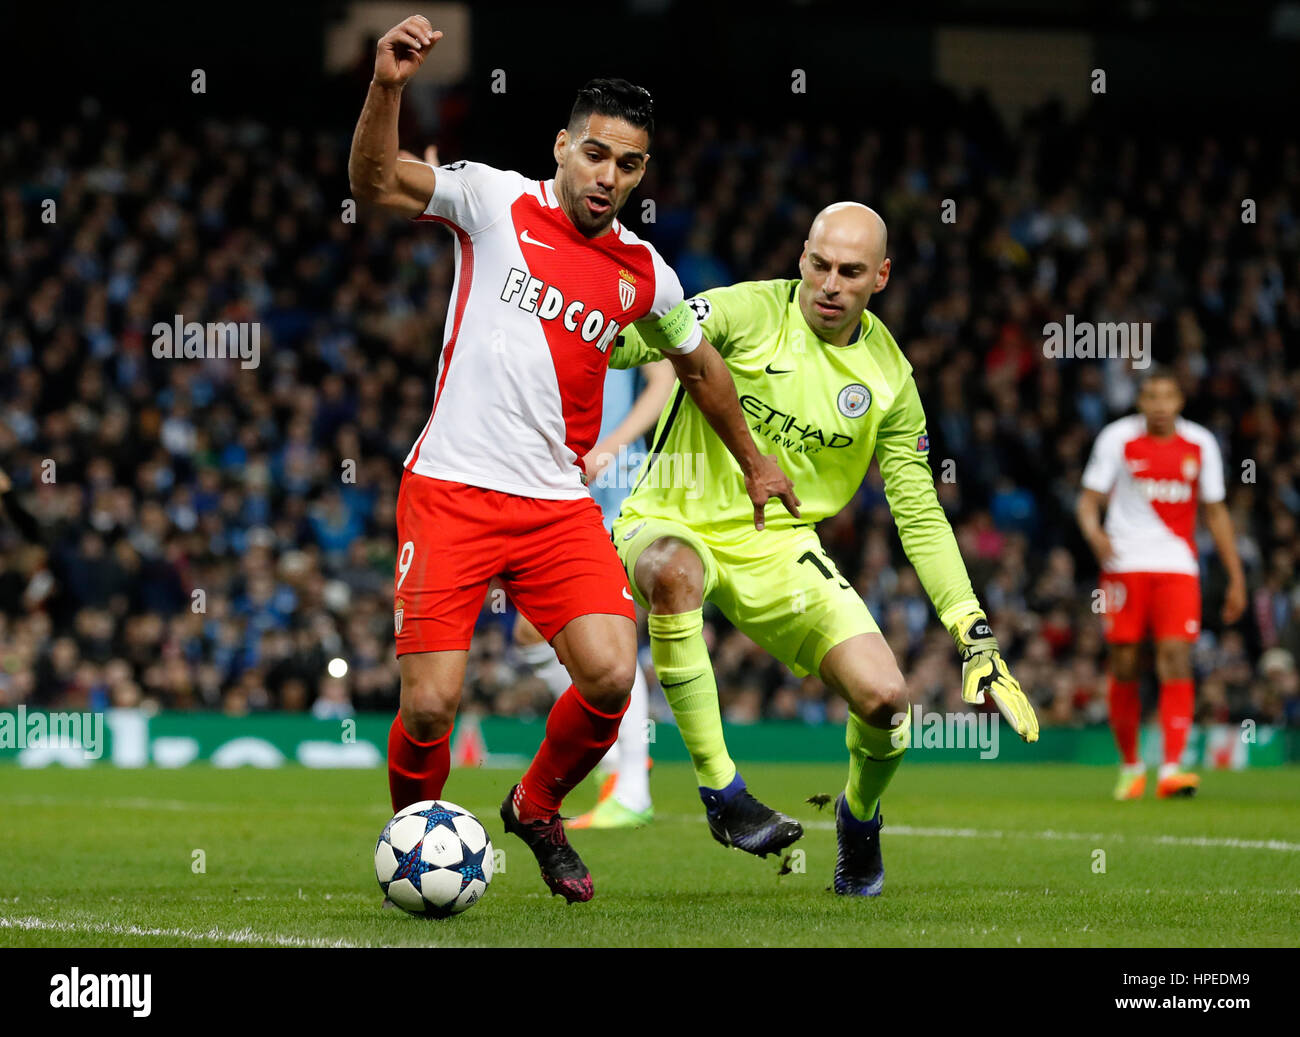 Manchester City goalkeeper Willy Caballero and Monaco's Radamel Falcao (right) battle for the ball during the UEFA Champions League match at the Etihad Stadium, Manchester. Stock Photo